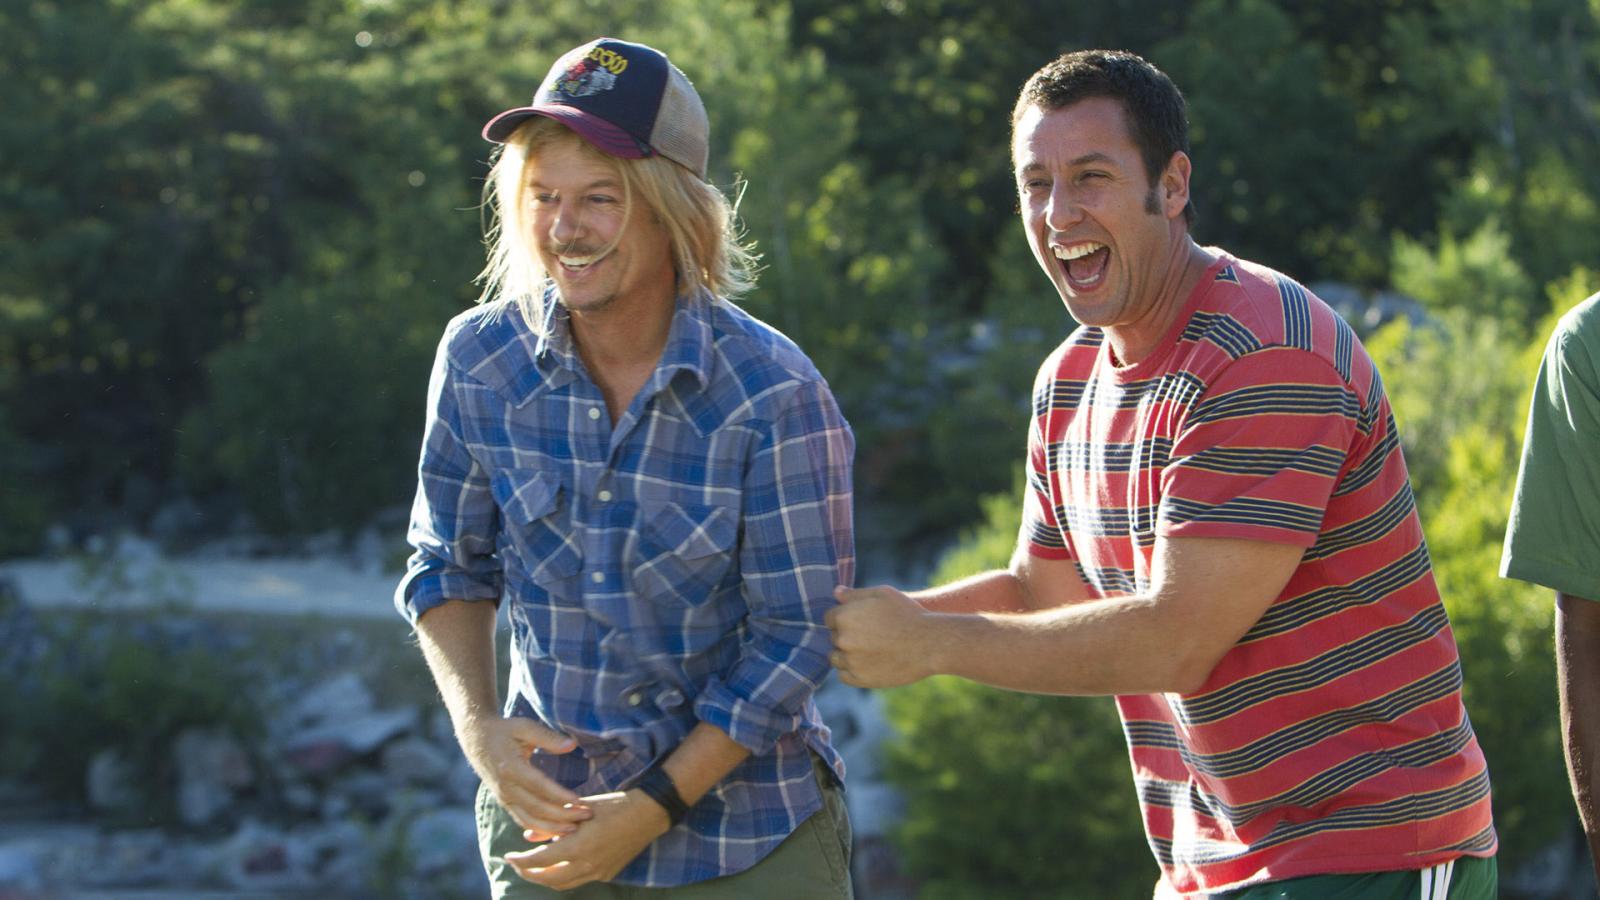 15 Best Movies With Adam Sandler to Watch With Family - image 12